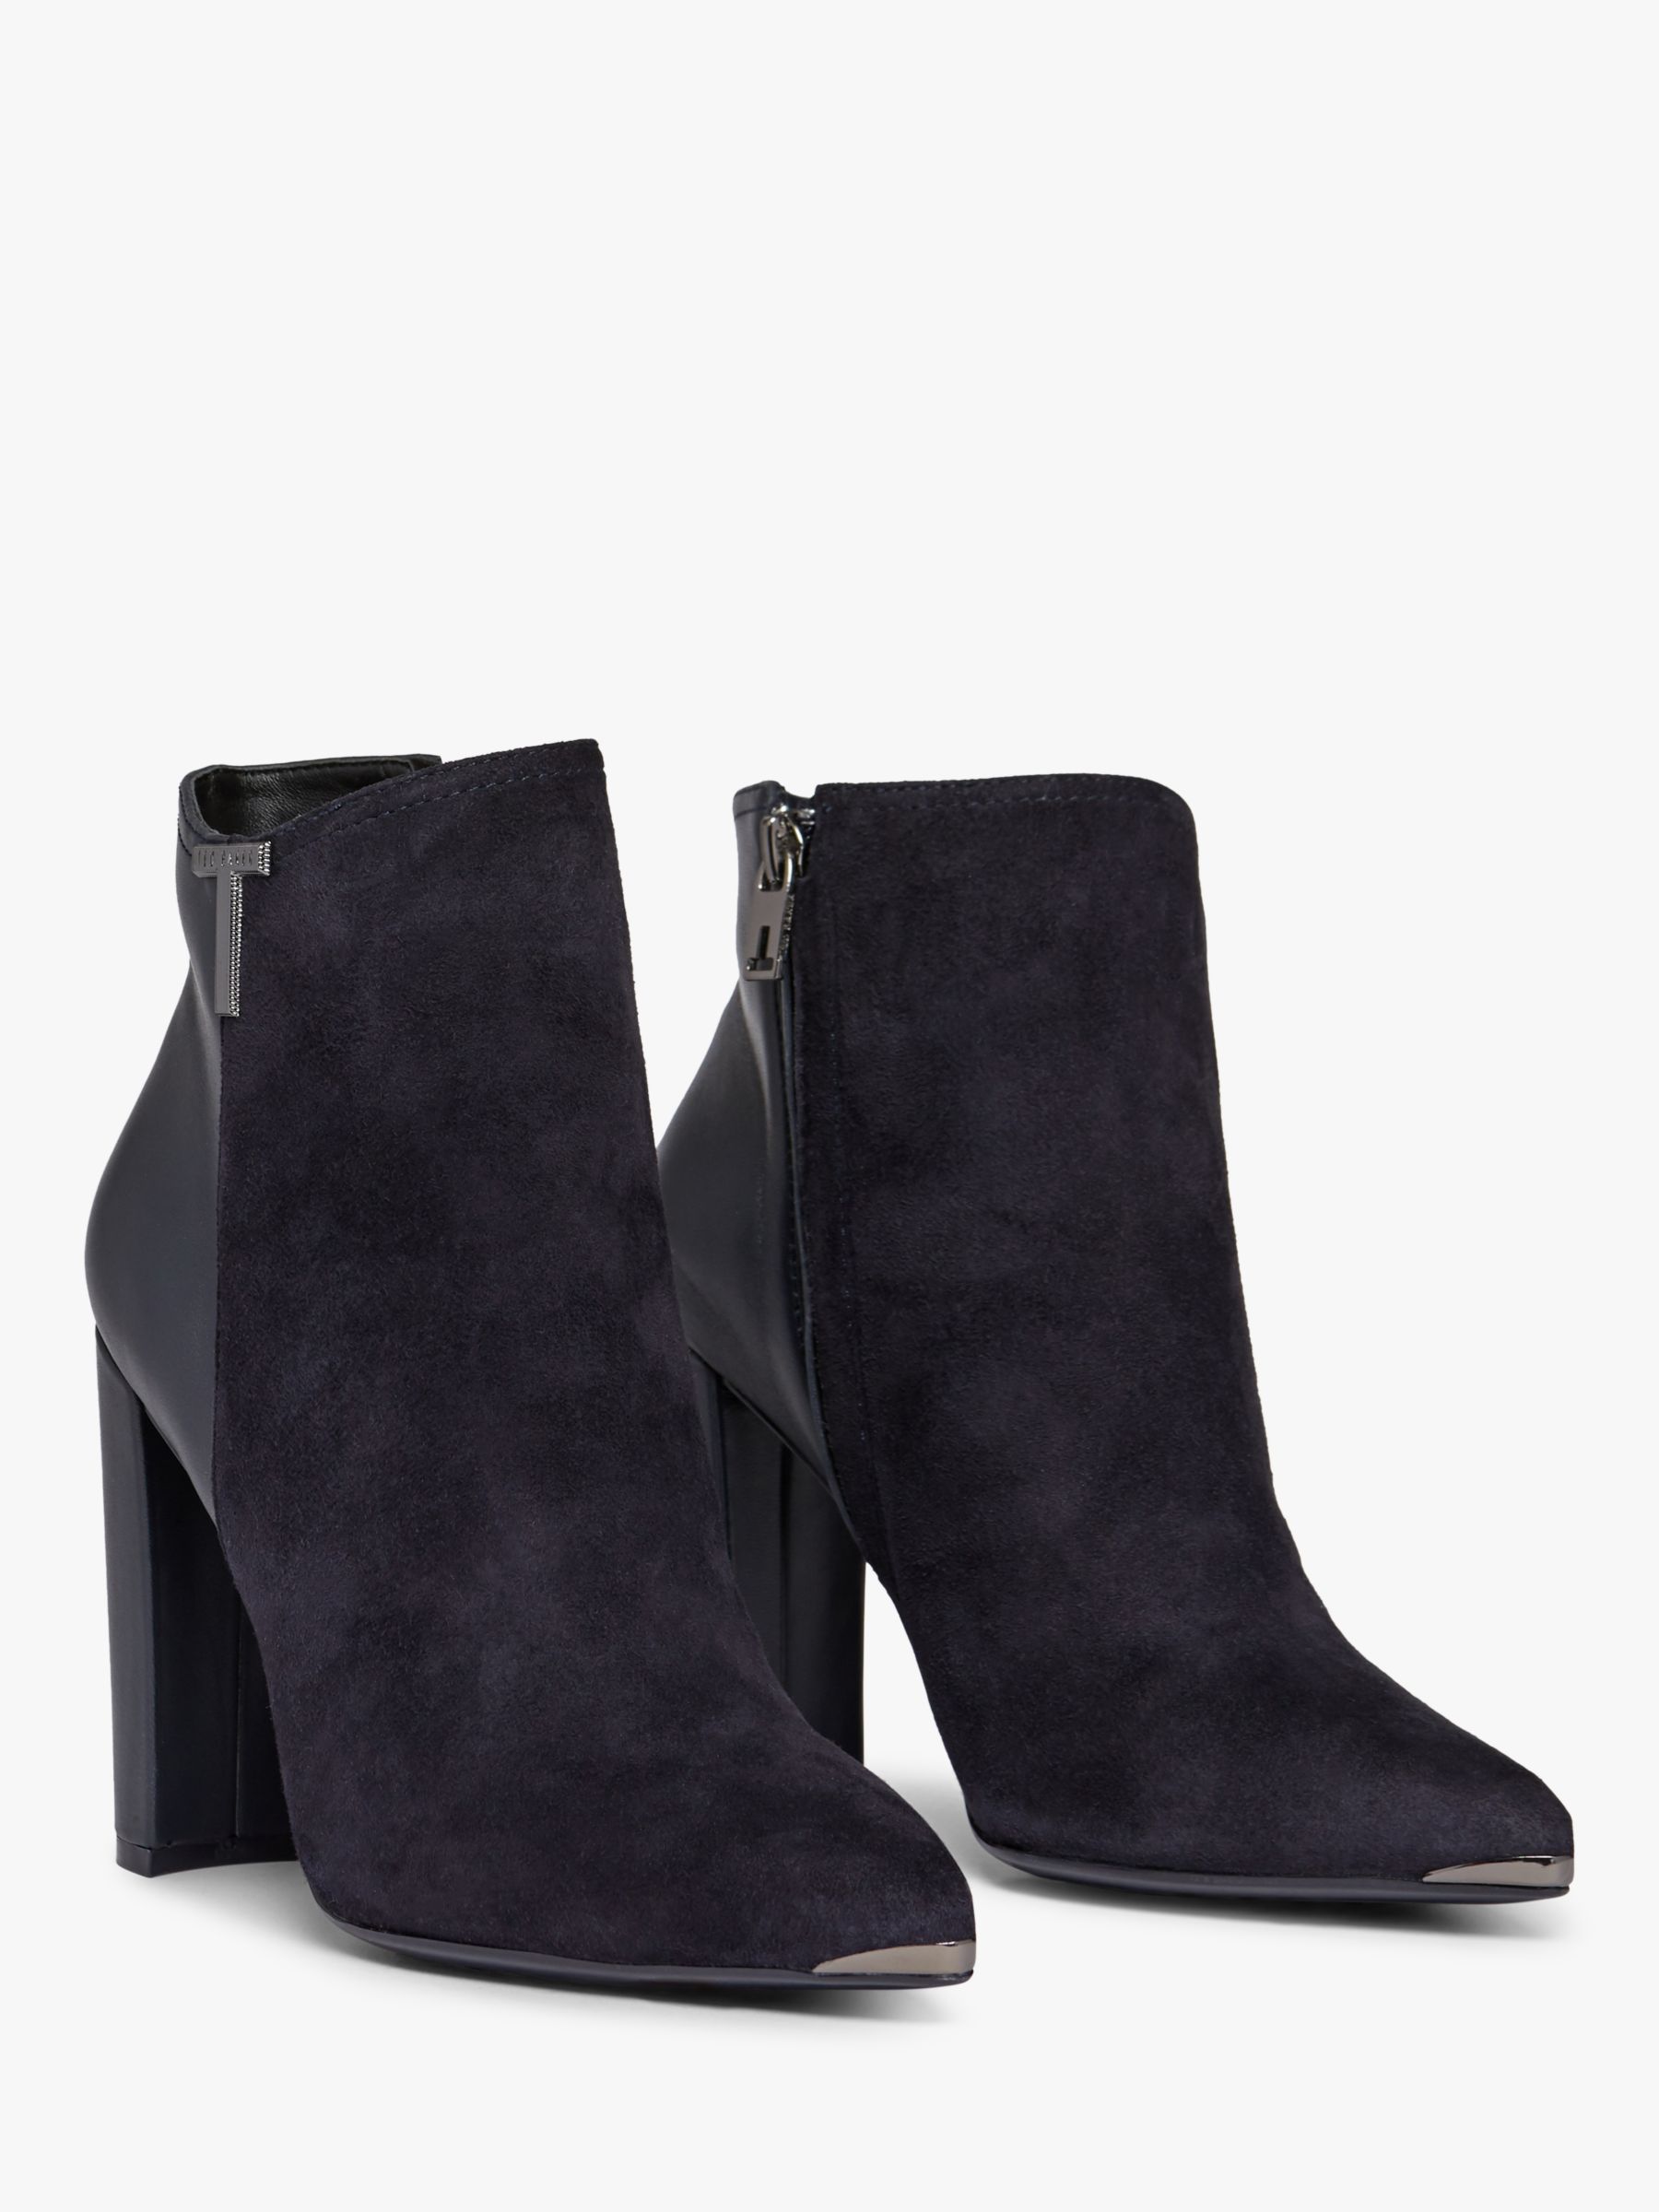 Ted Baker Inala Leather Suede Point Toe Ankle Boots, Navy at John Lewis ...